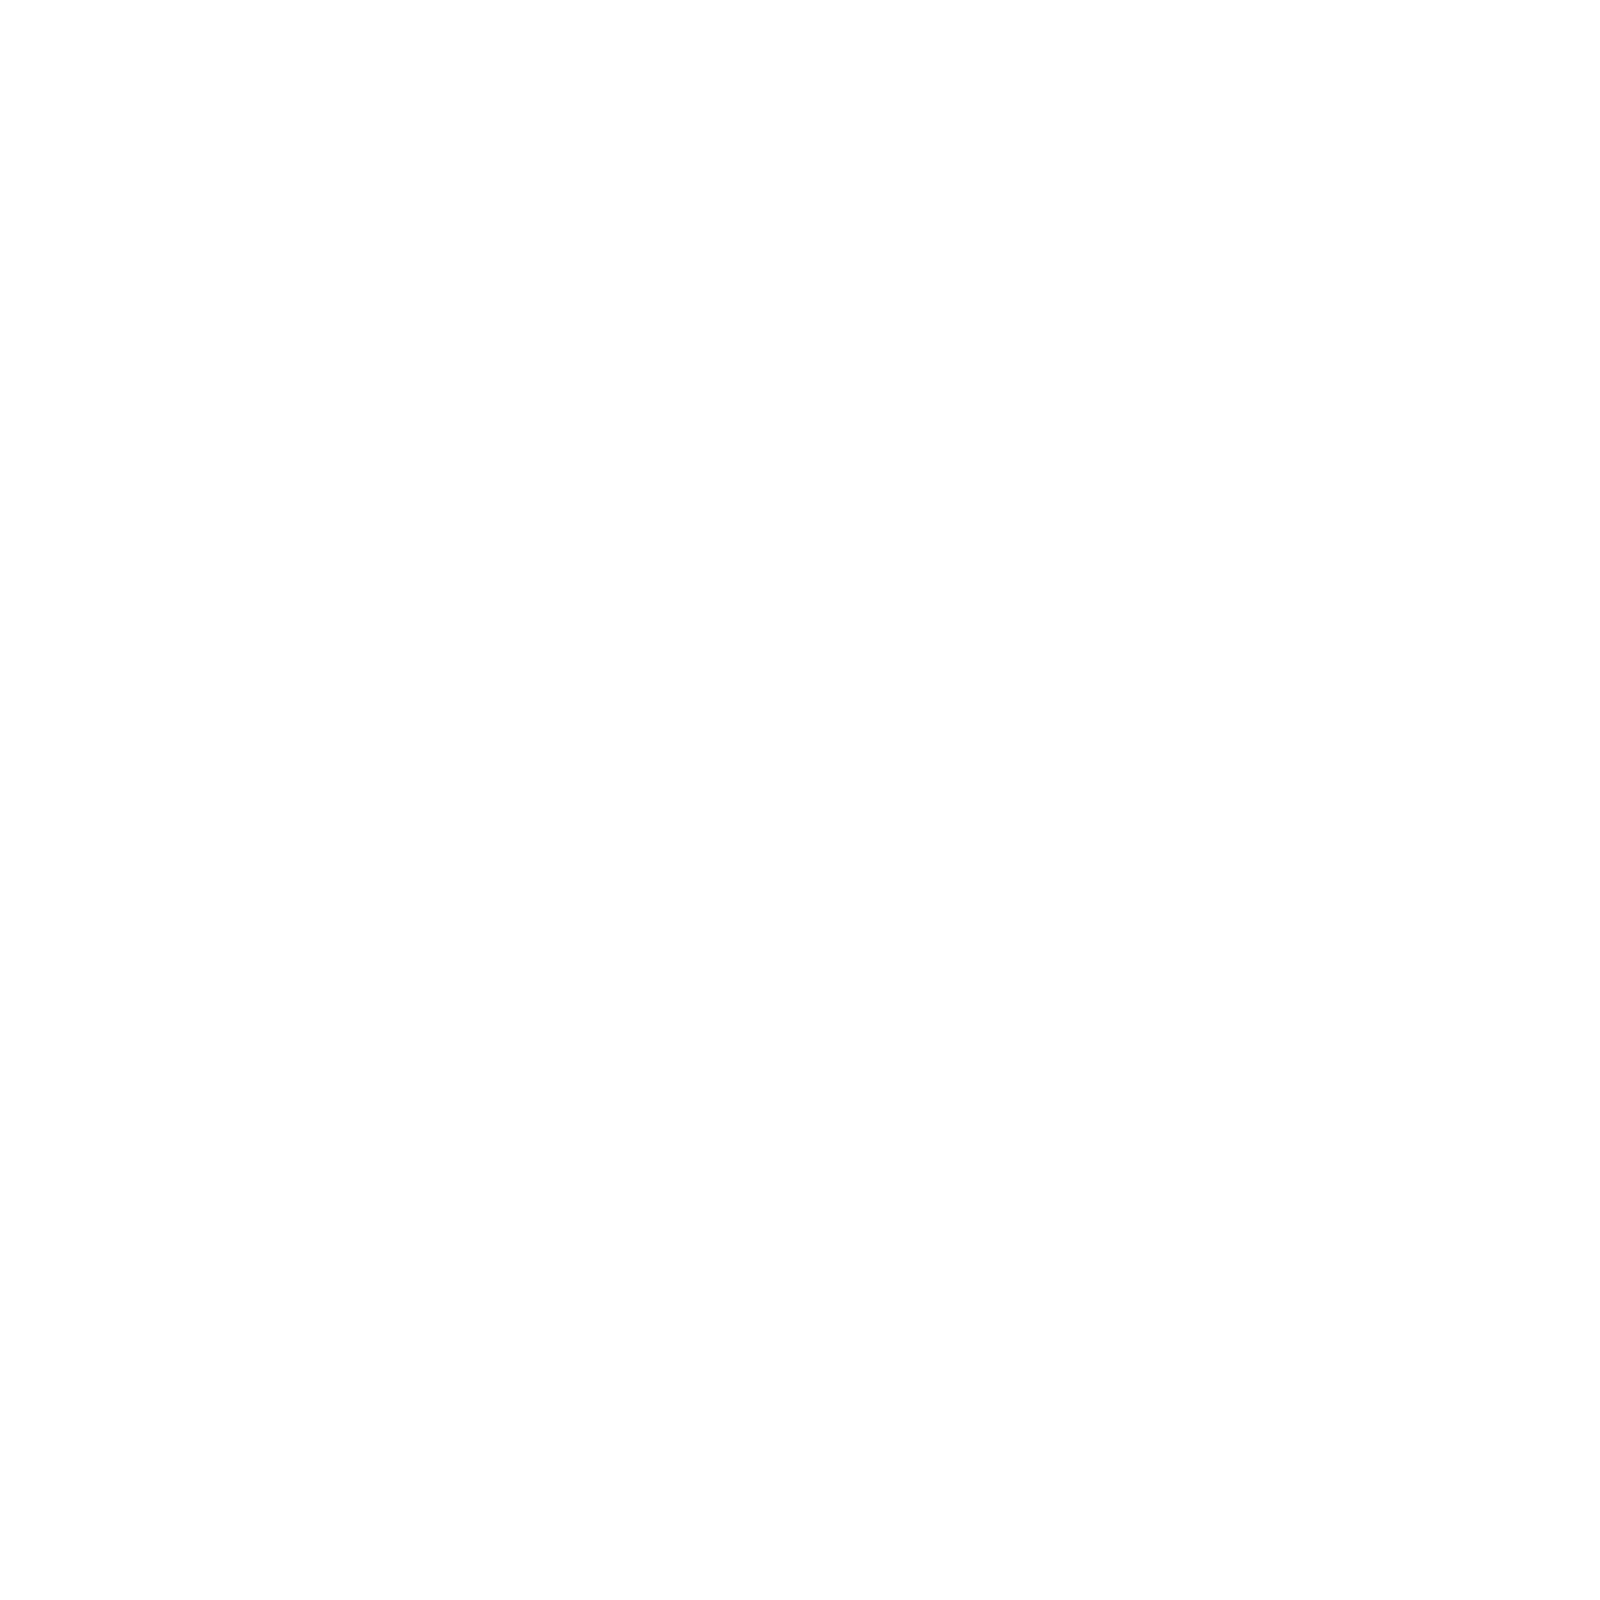 White Barn Primary Logo faded into the background.